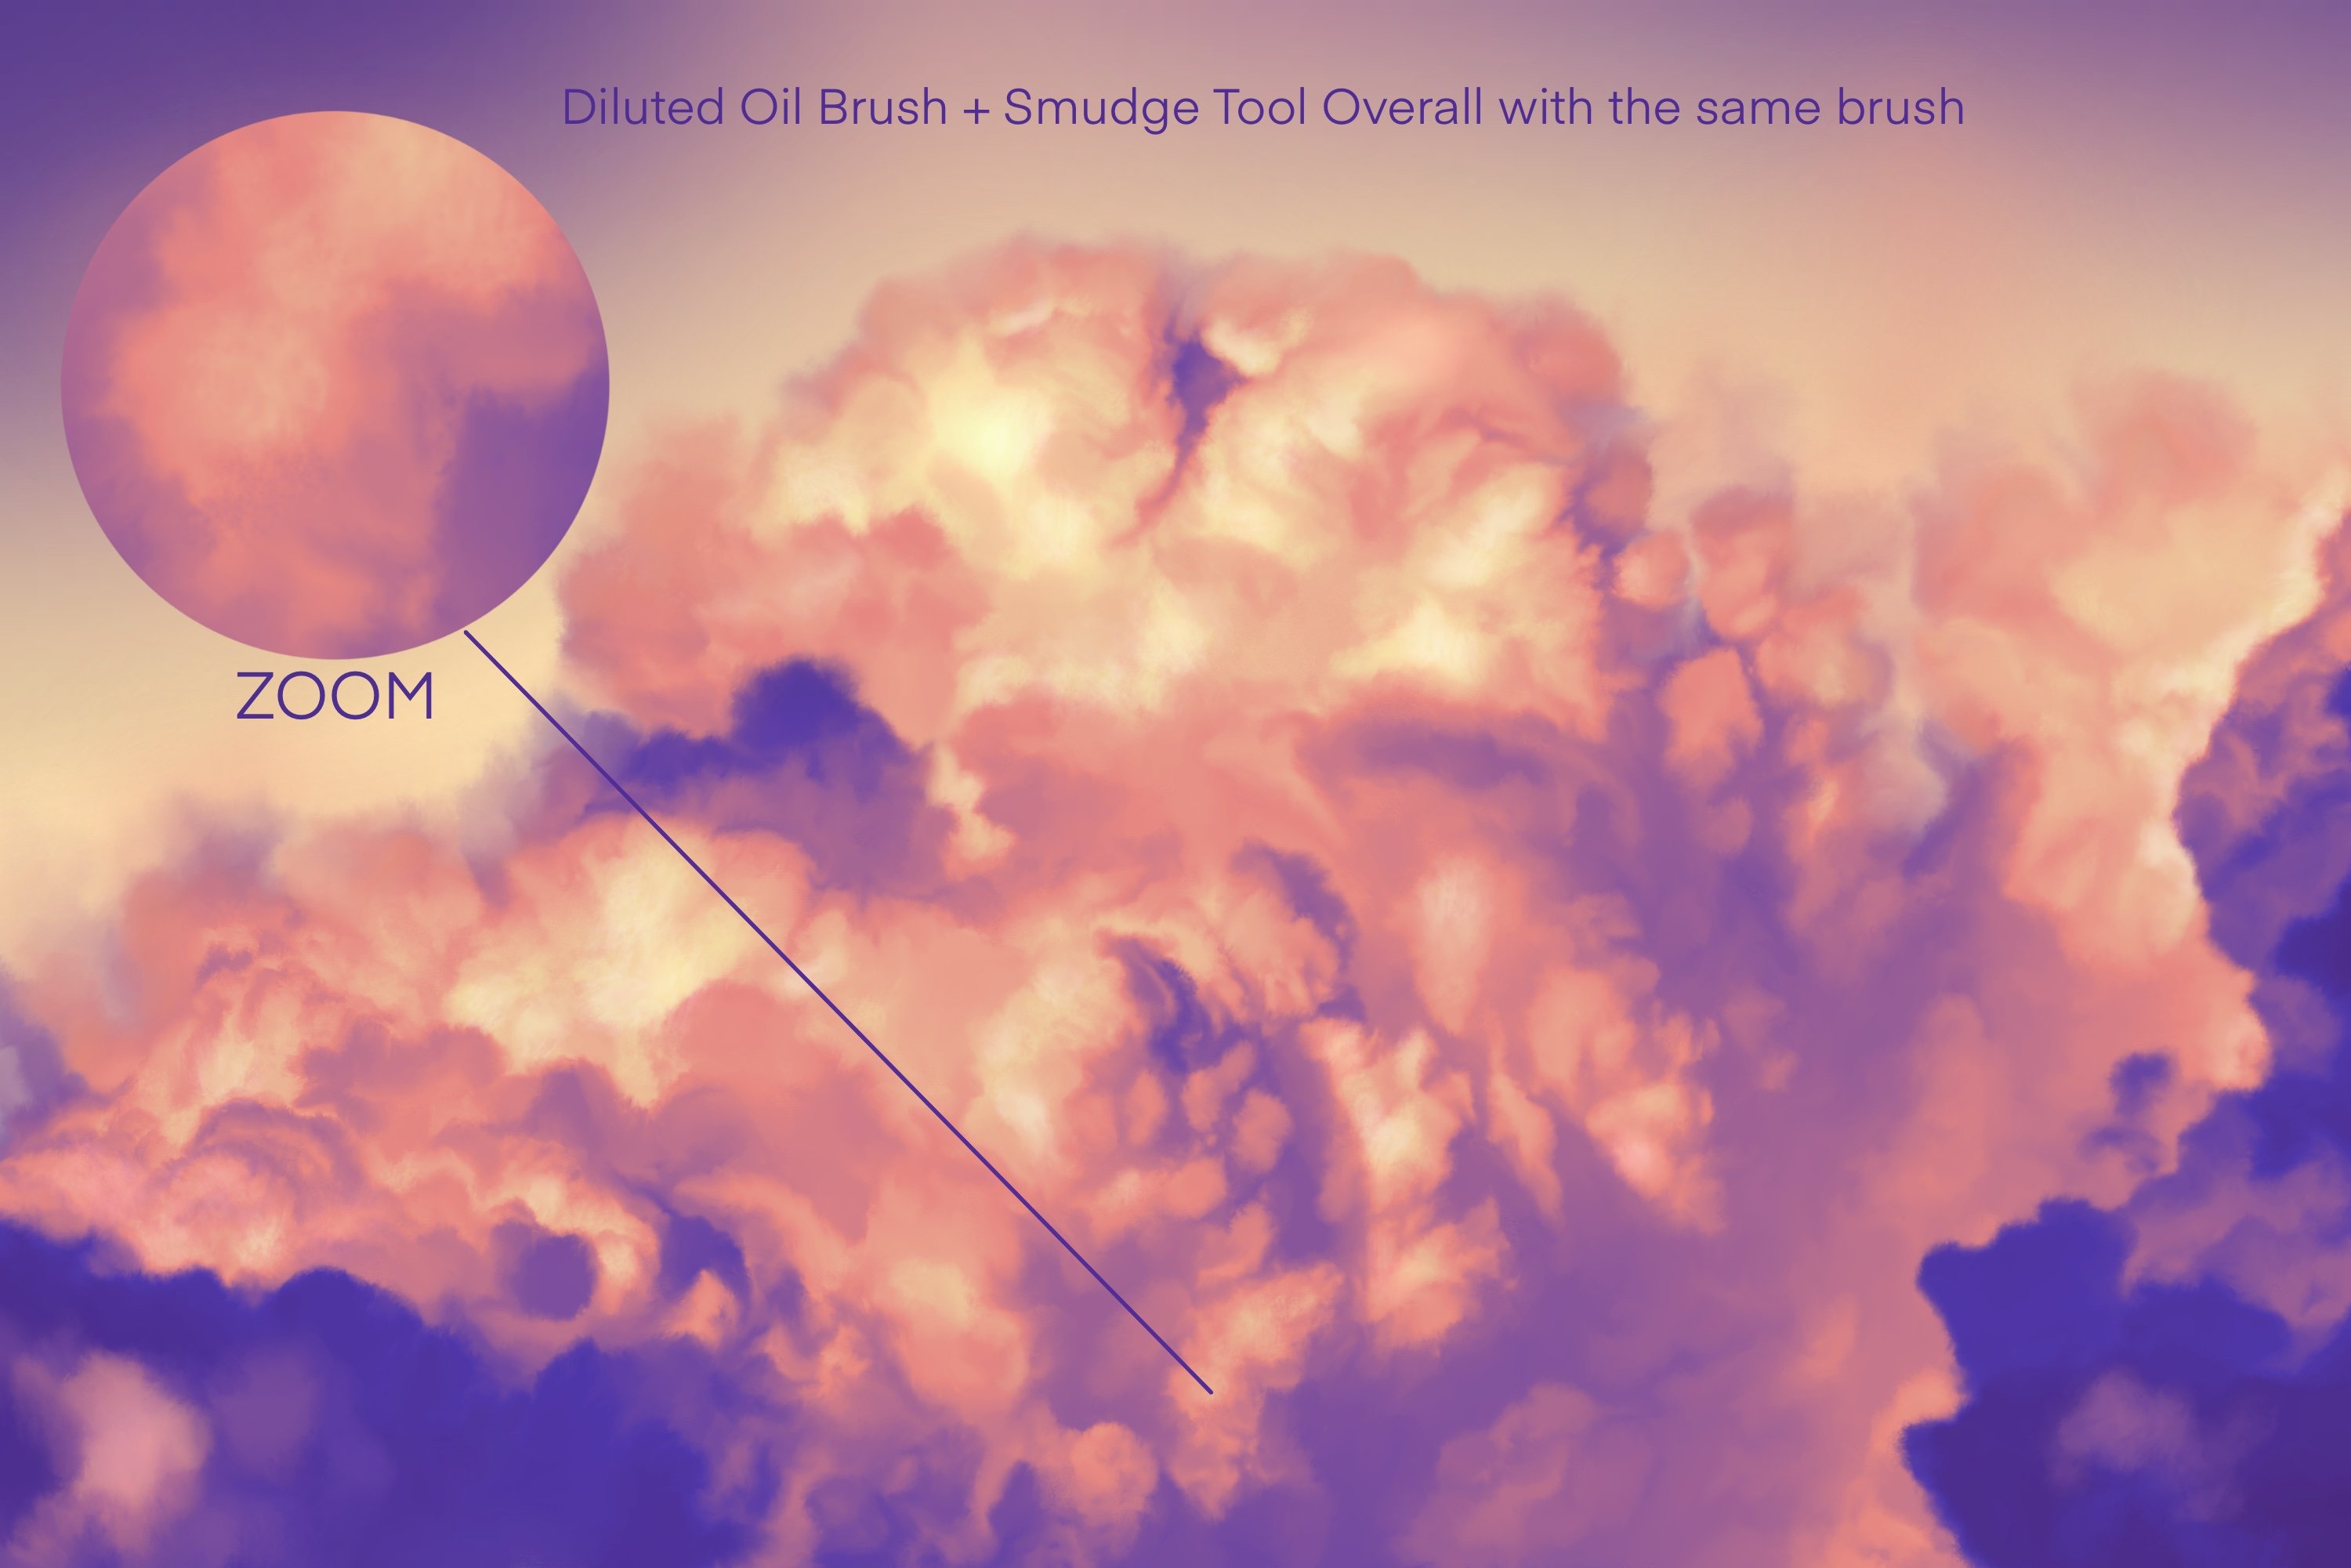 Diluted oil brush + Smidge tool overall with the same brush.